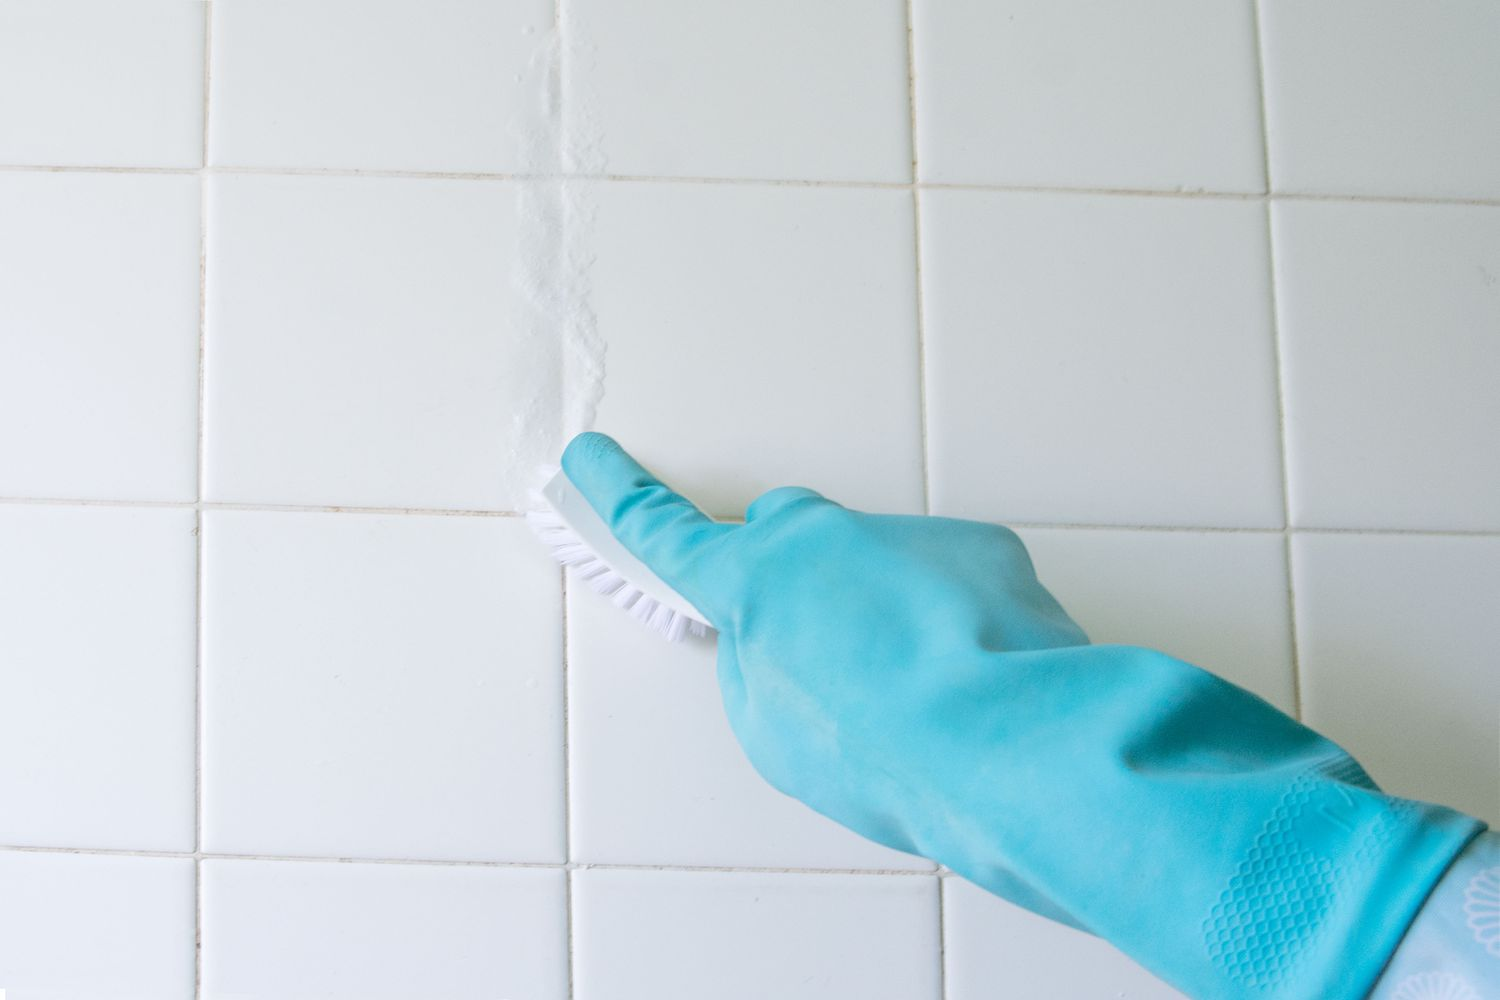 Scrub the grout lines with a brush